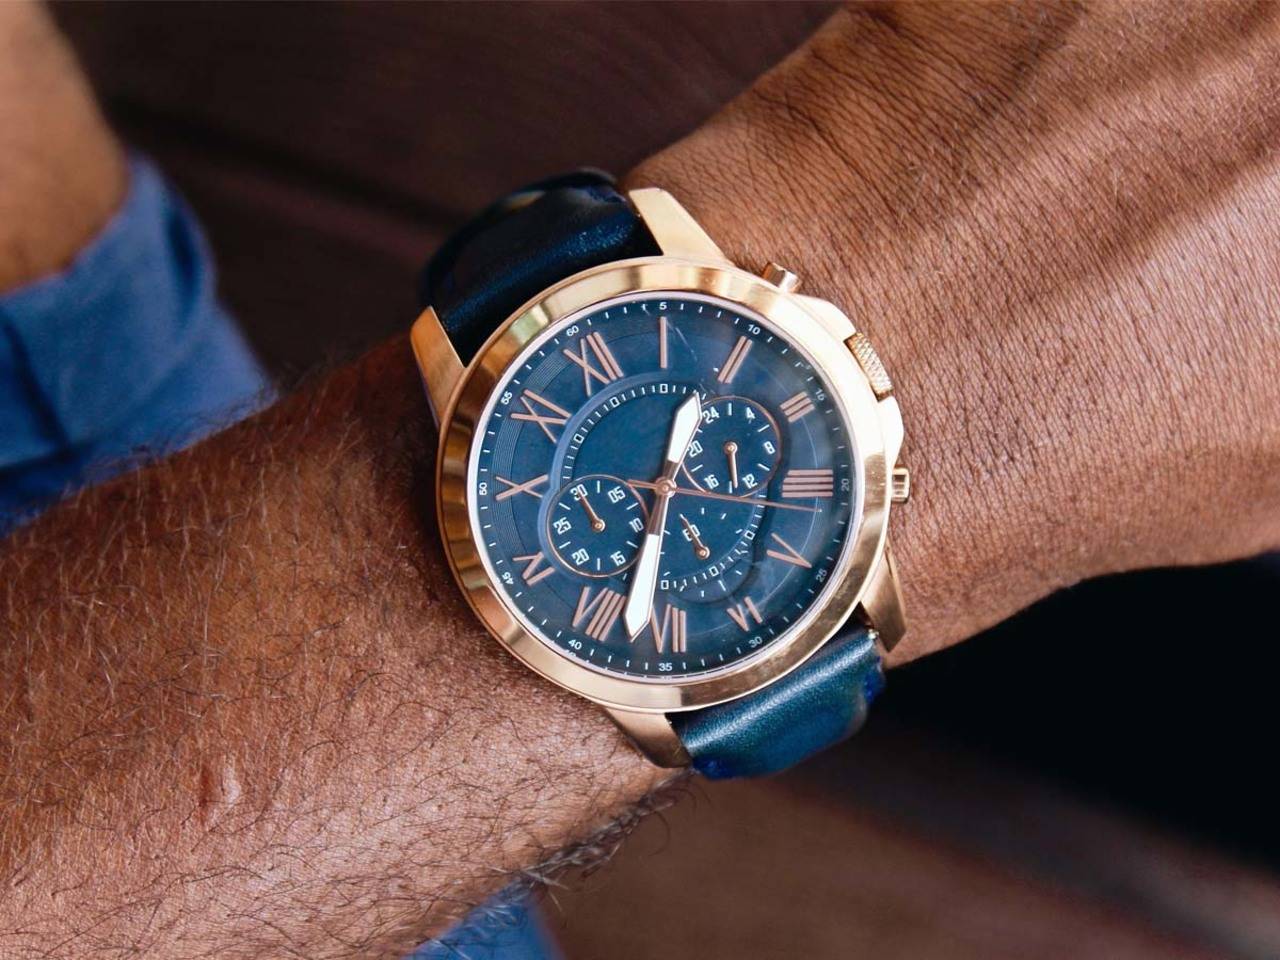 Watches for men: Navy timepieces that look elegant and stylish